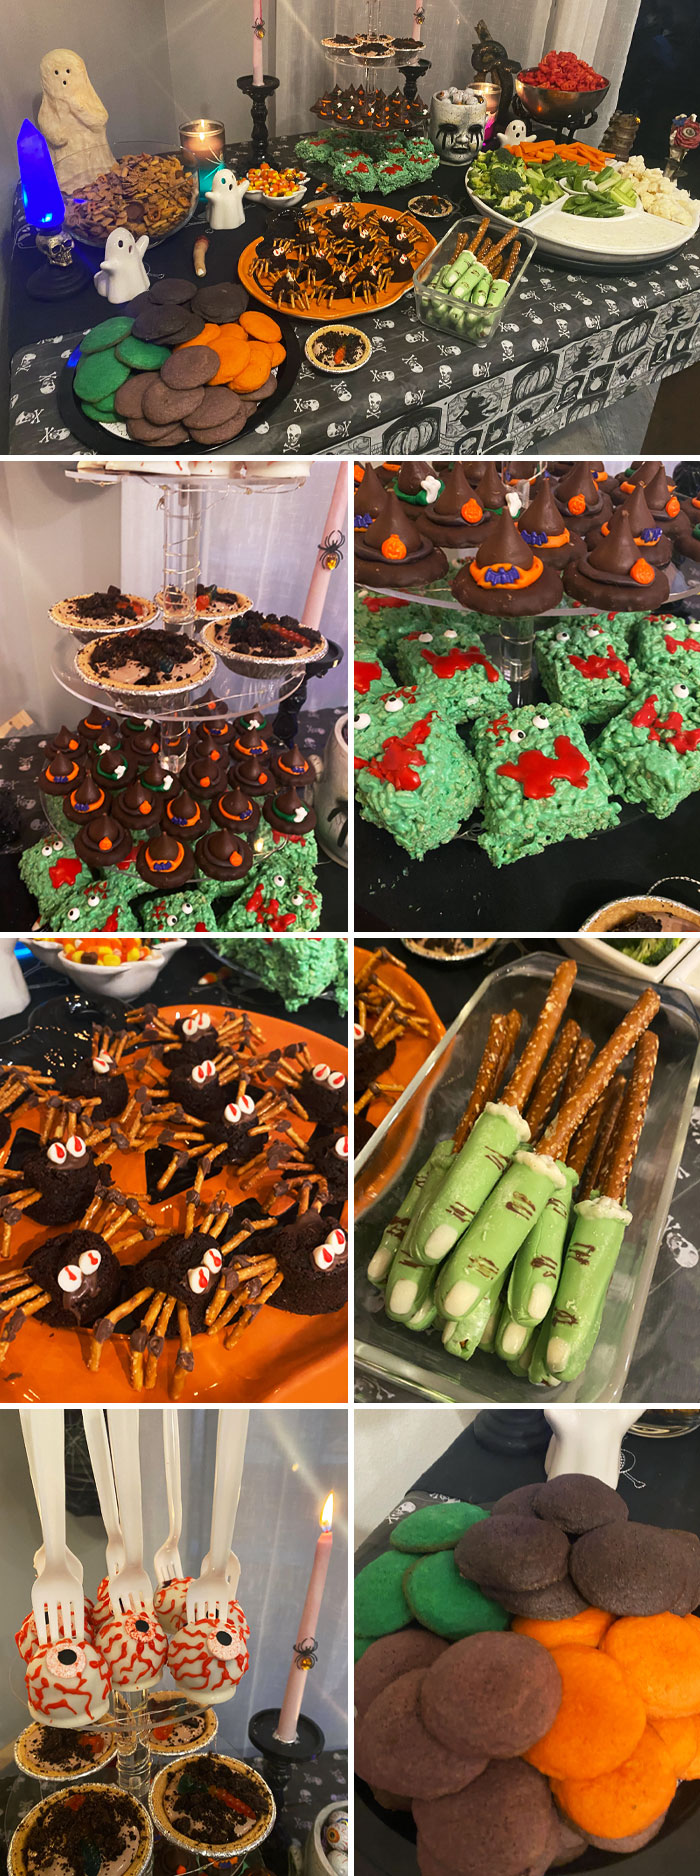 I Wanted To Share Some Of My Halloween Baking